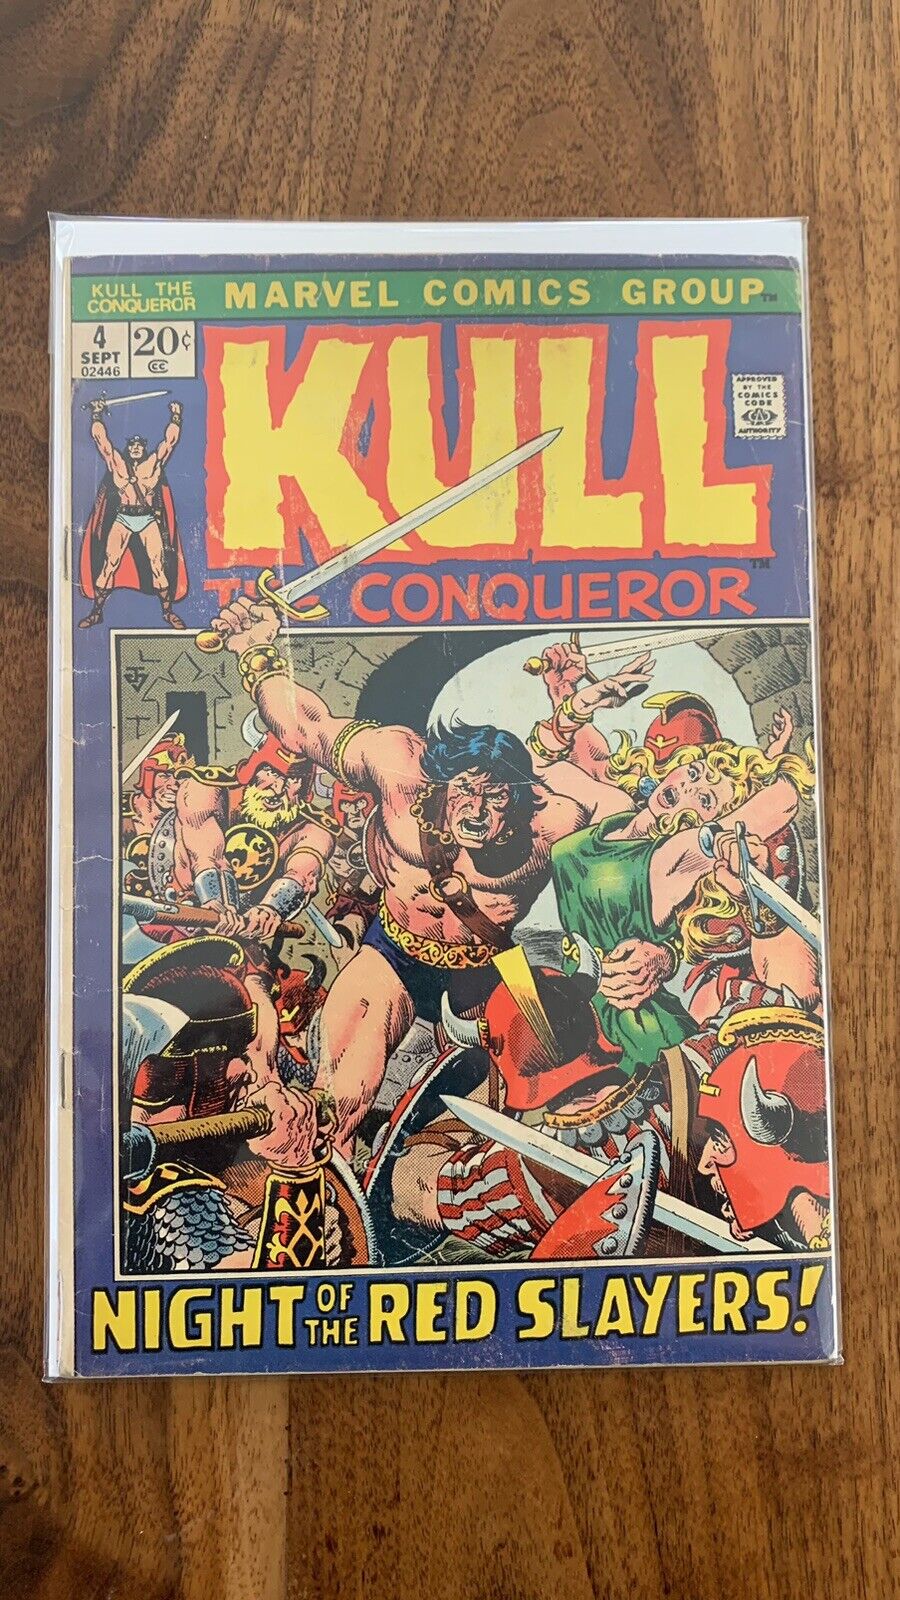 Kull The Conqueror #4 - The Night of the Red Slayers 1971 Marvel